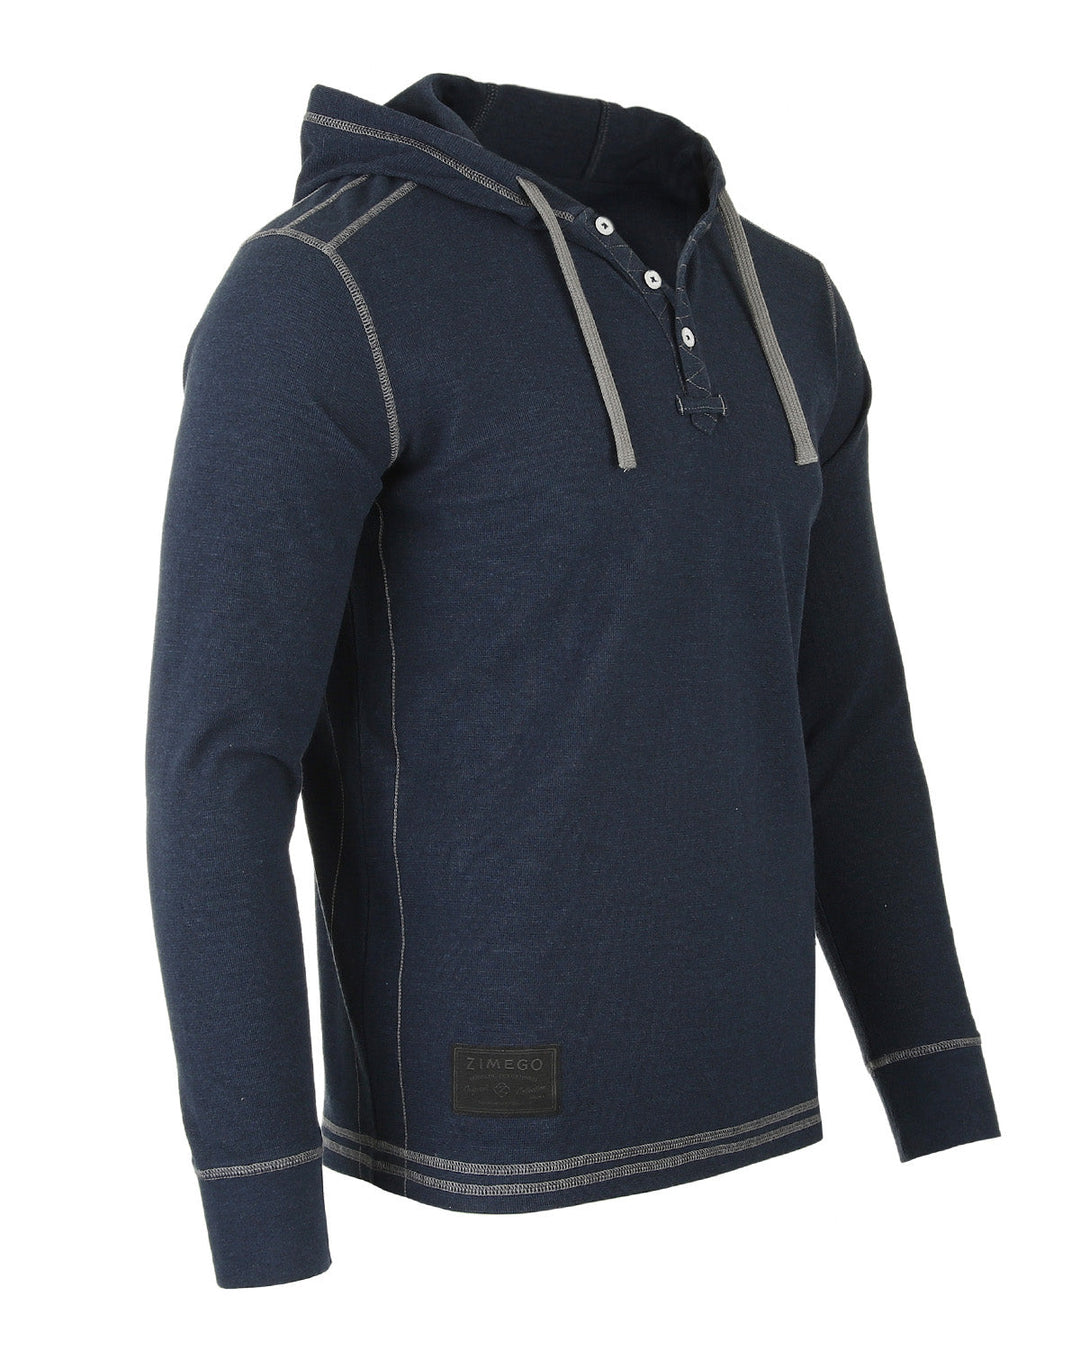 Navy Men's Thermal Long Sleeve Lightweight Fashion Hooded Henley